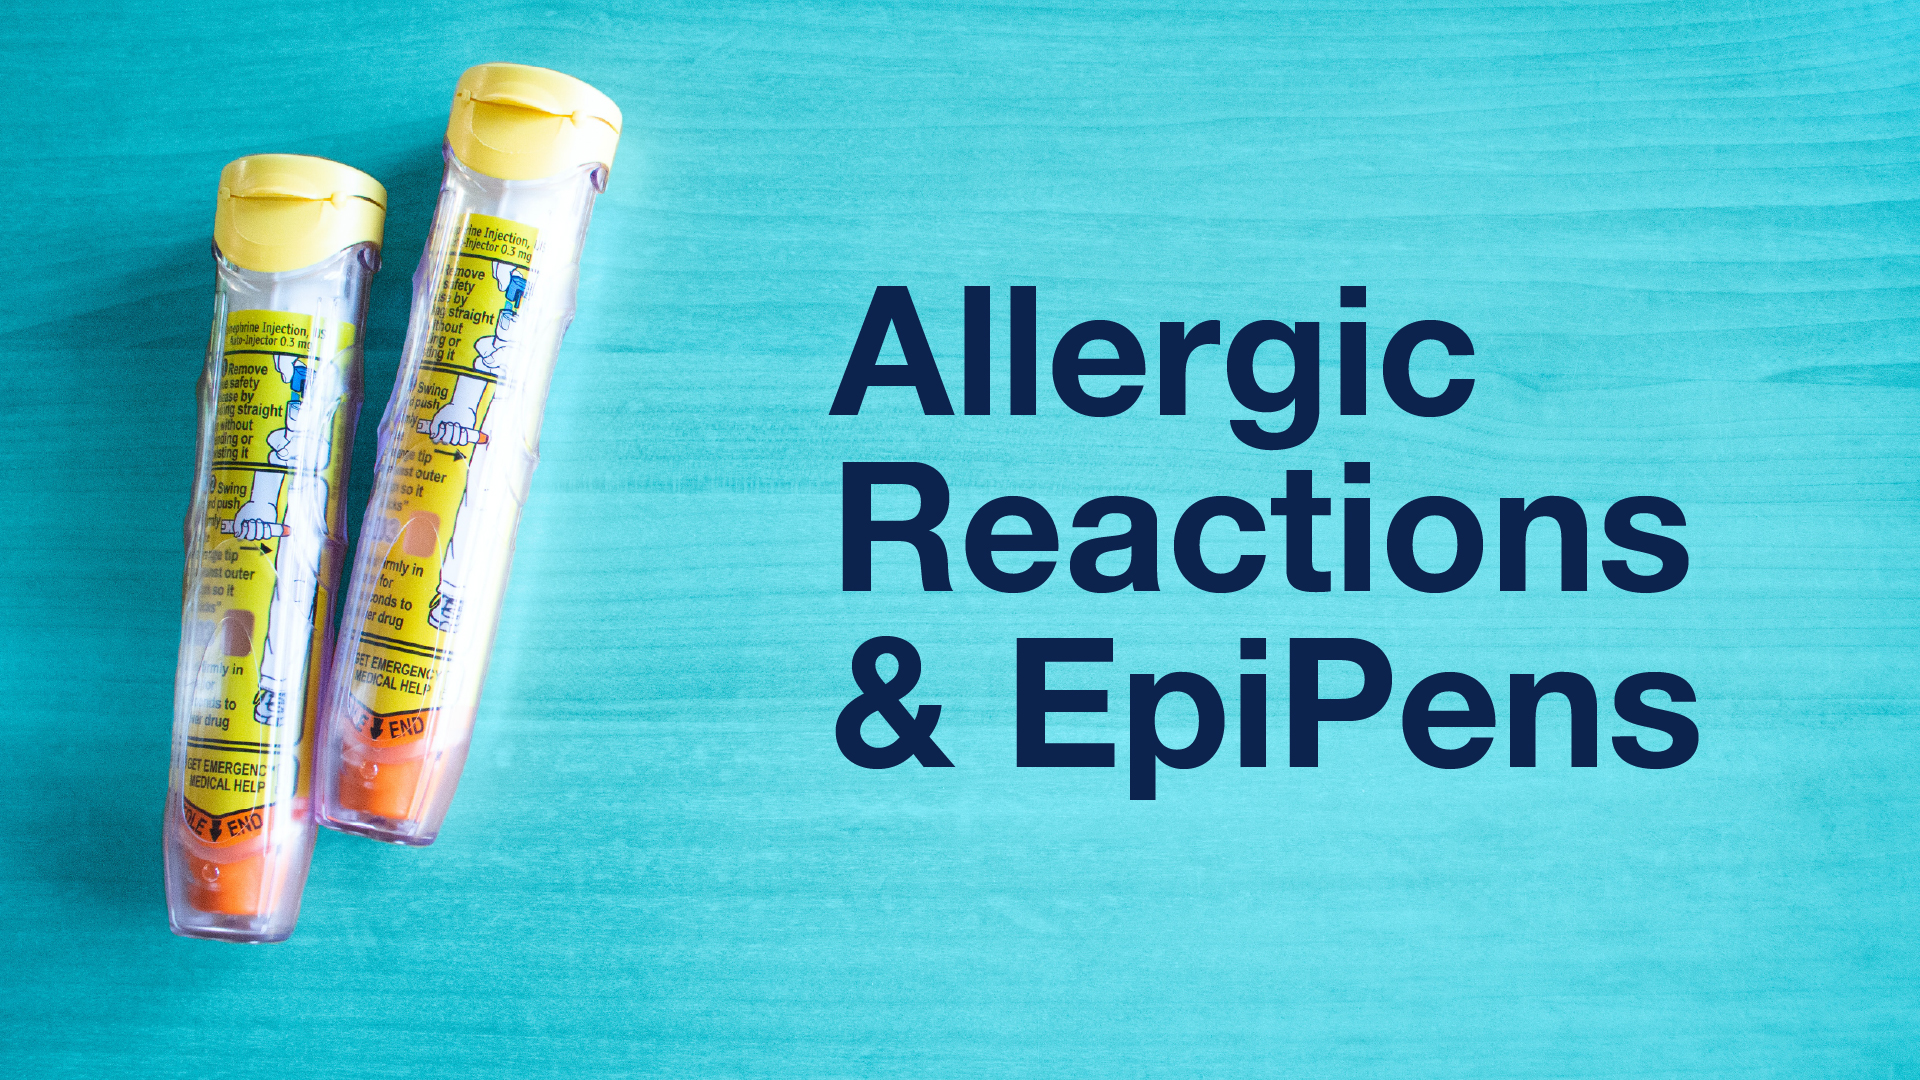 allergic reactions & epipens